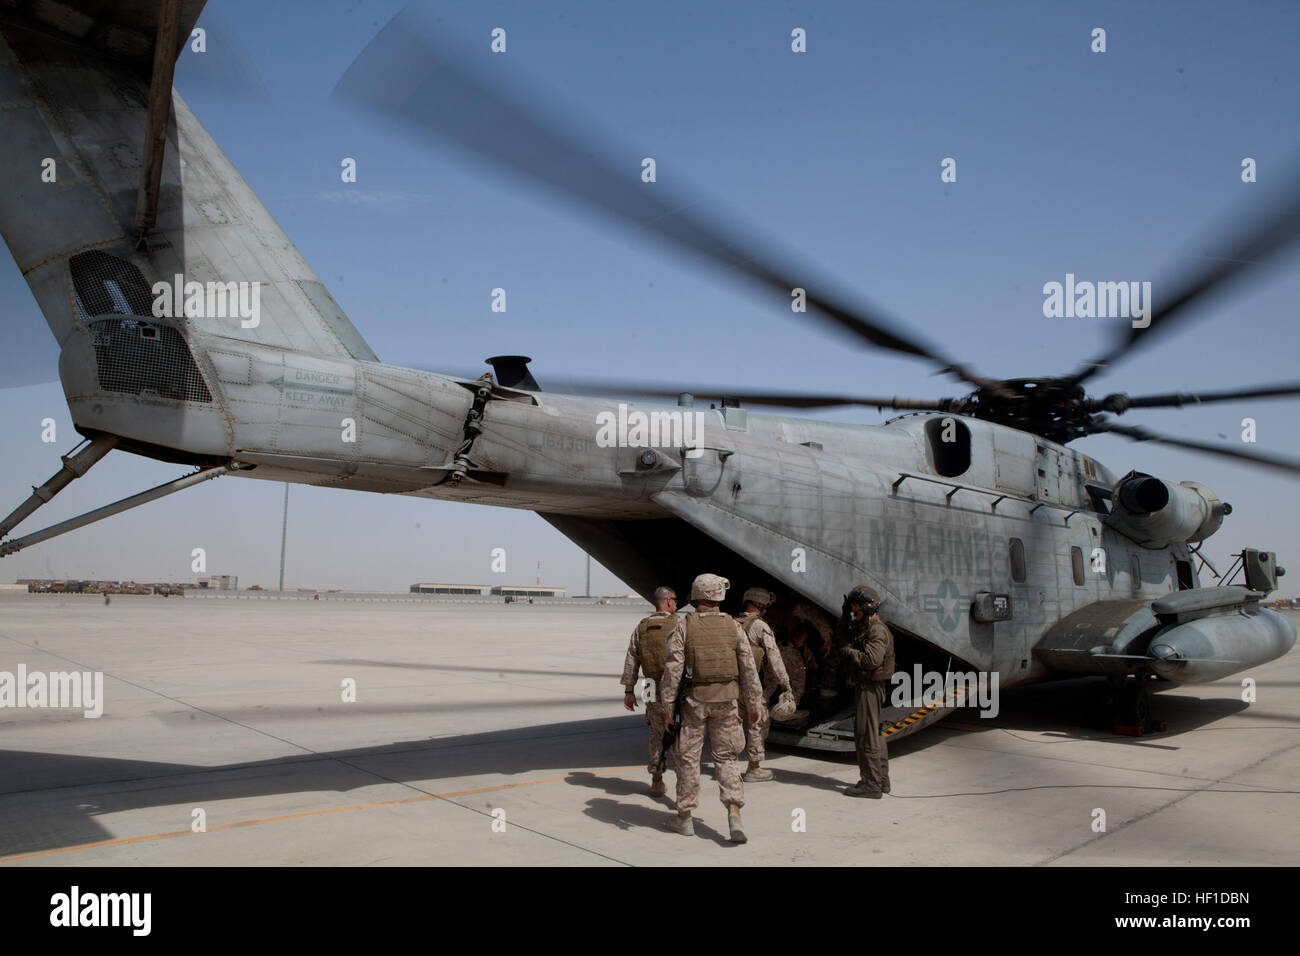 Military staff with the International Security Assistance Force and Regional Command (Southwest) board a U.S. Marine Corps CH-53E Super Stallion helicopter at Camp Bastion in Helmand province, Afghanistan, July 29, 2013. U.S. Marine Corps Gen. Joseph F. Dunford, the commanding general of the International Security Assistance Force, and accompanying staff were en route to Main Operating Base Lashkar Gah to discuss various issues and meet with the governor of Helmand province. (DoD photo by Sgt. Tammy K. Hineline, U.S. Marine Corps/Released) CH-53E Super Stallion helicopter, Camp Bastion in Helm Stock Photo